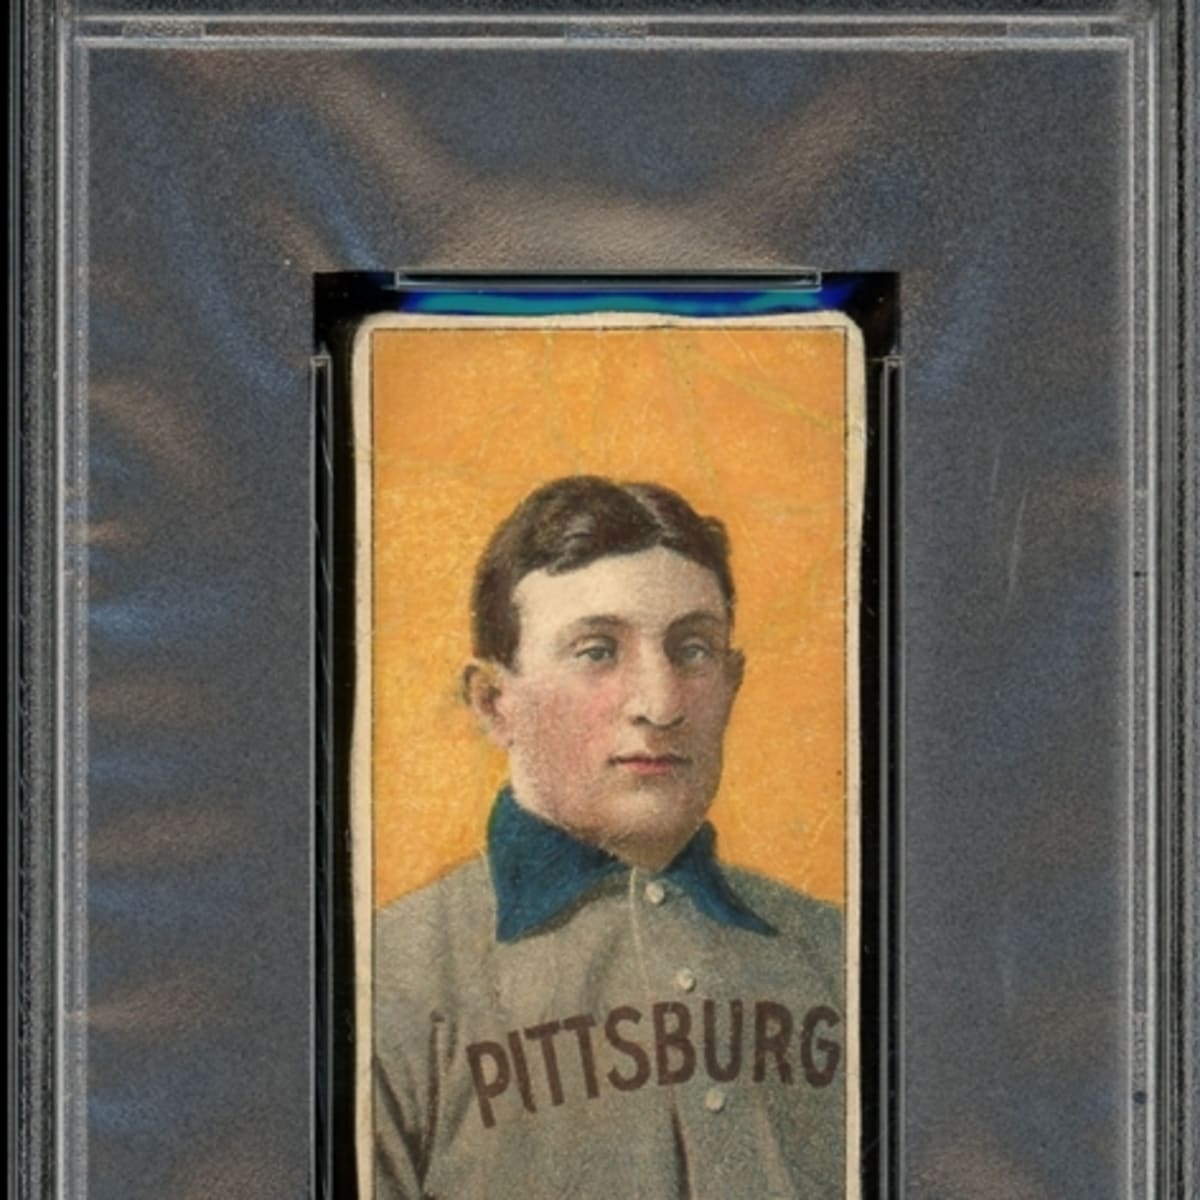 Low-grade T206 Honus Wagner card sells for $1.96M at Mile High